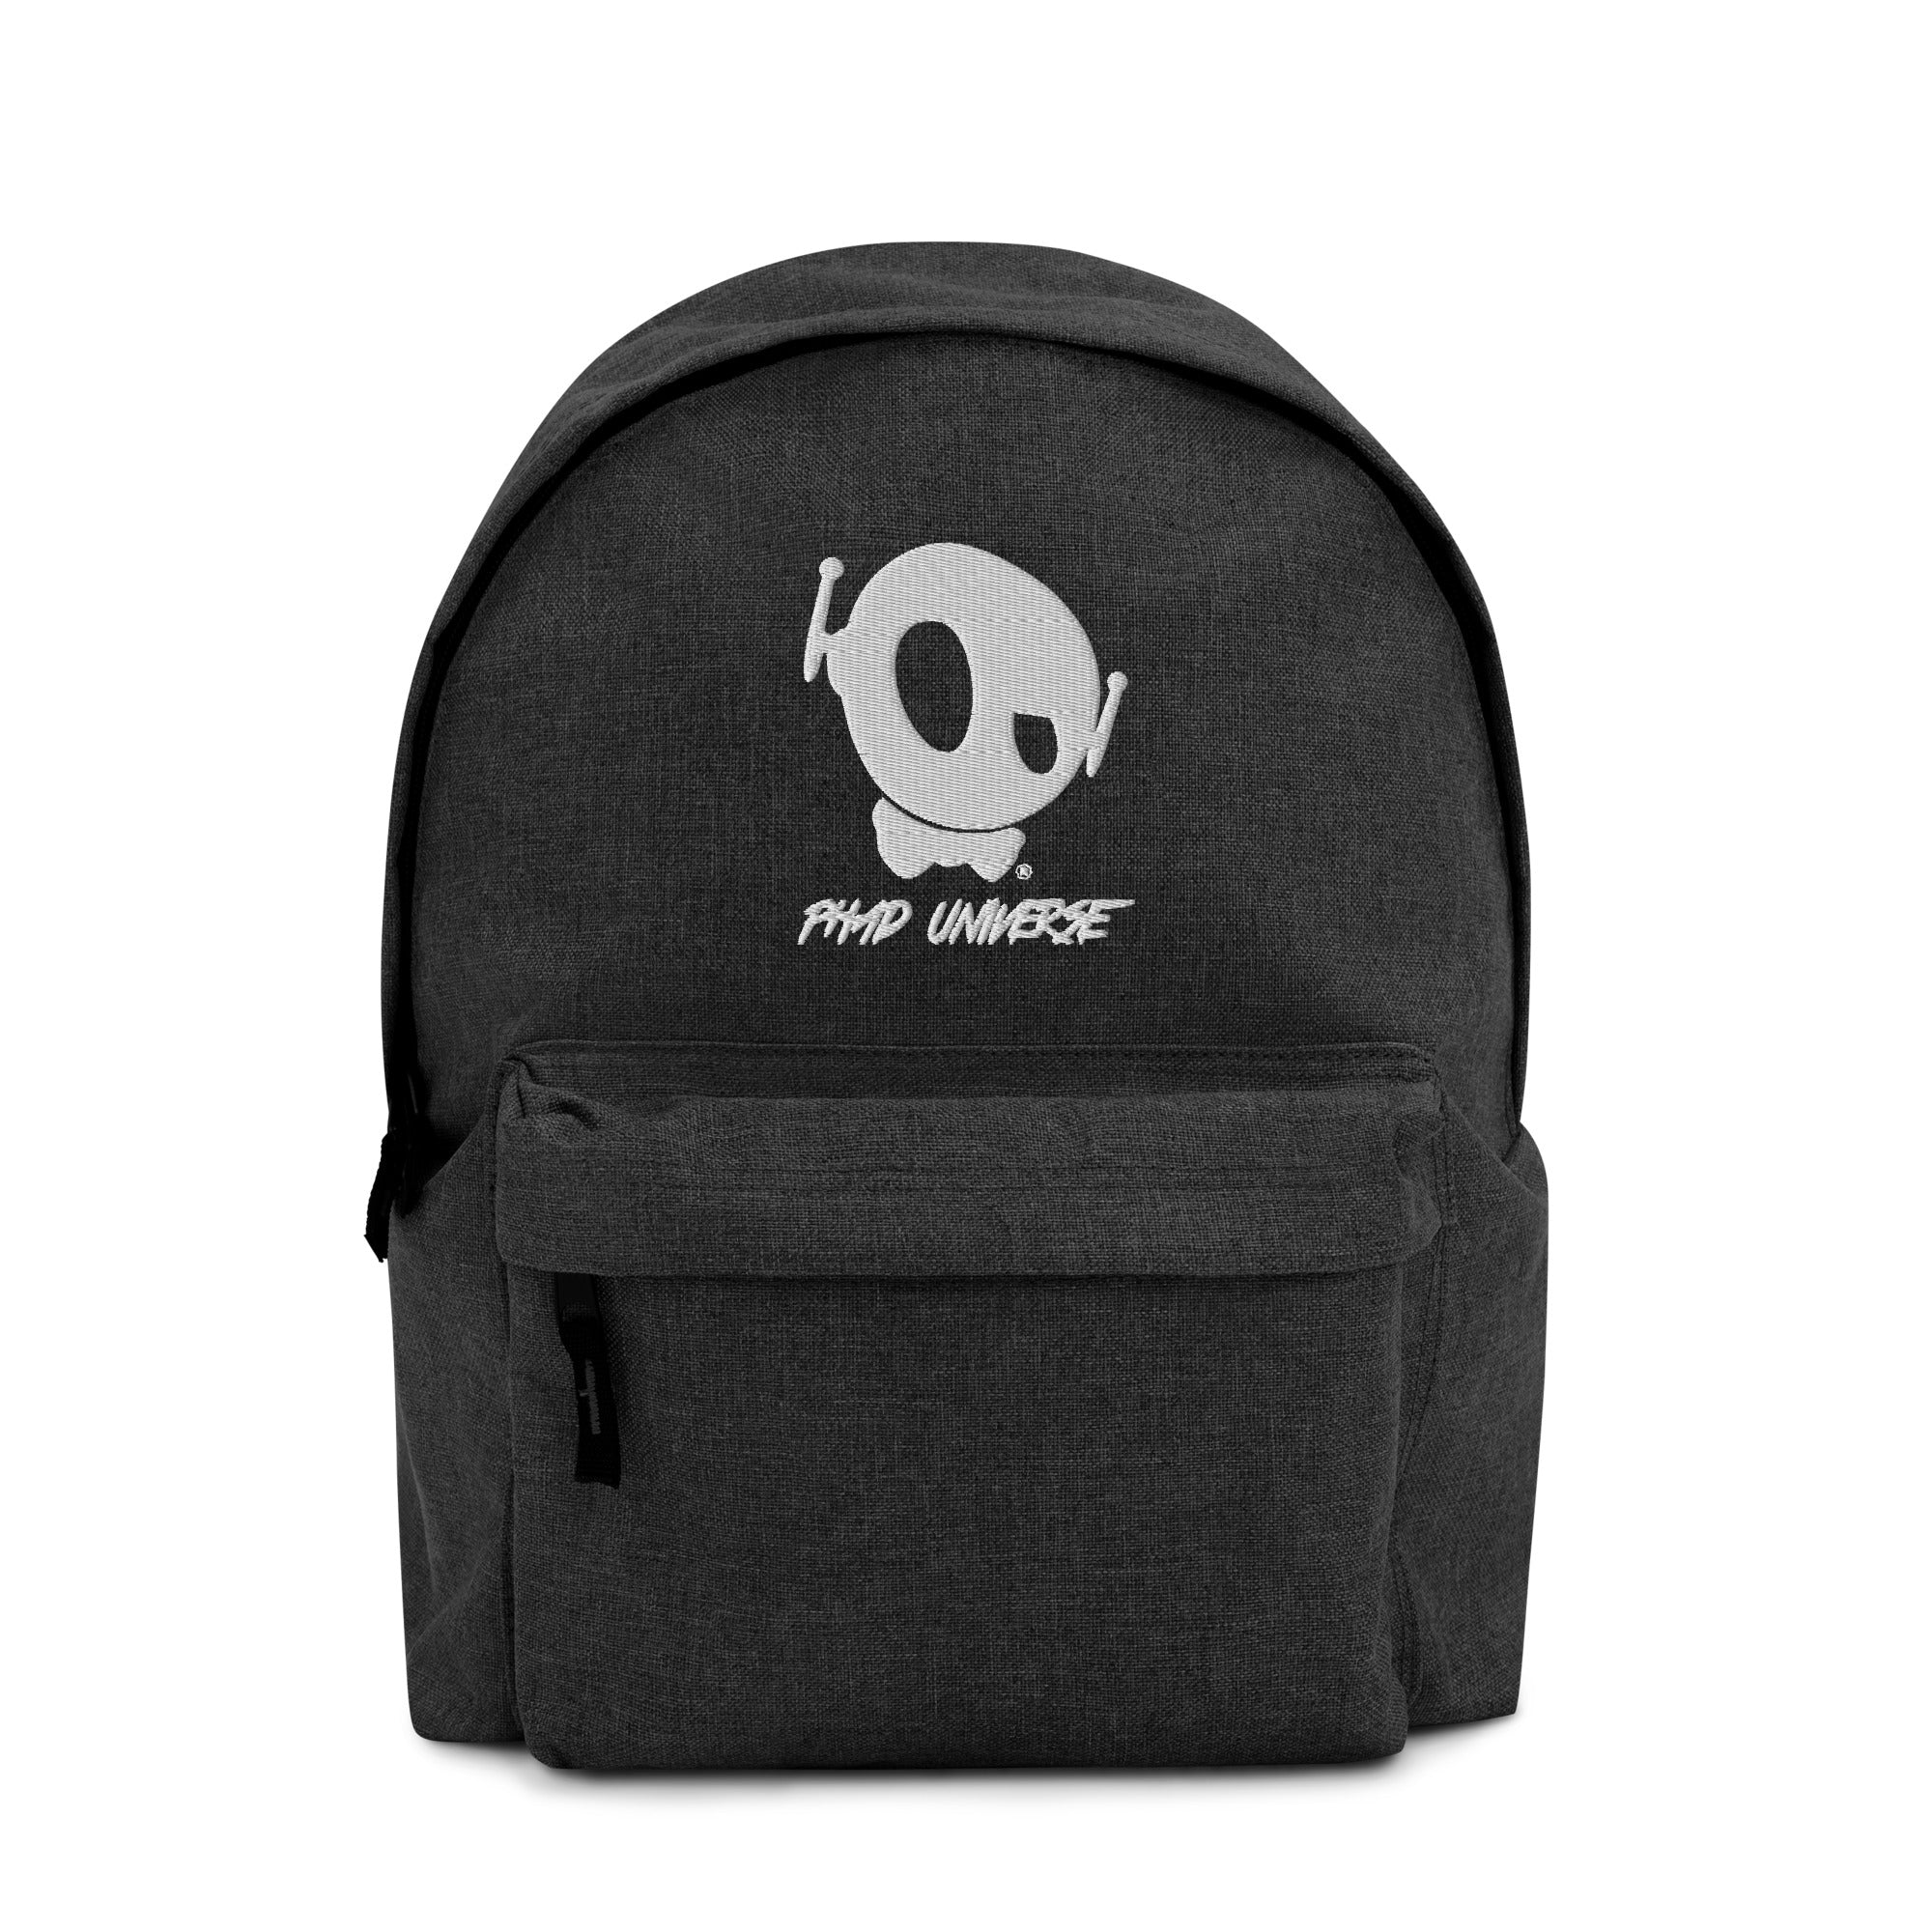 TRUE CLASSIC PU EMBROIDERED BACKPACK